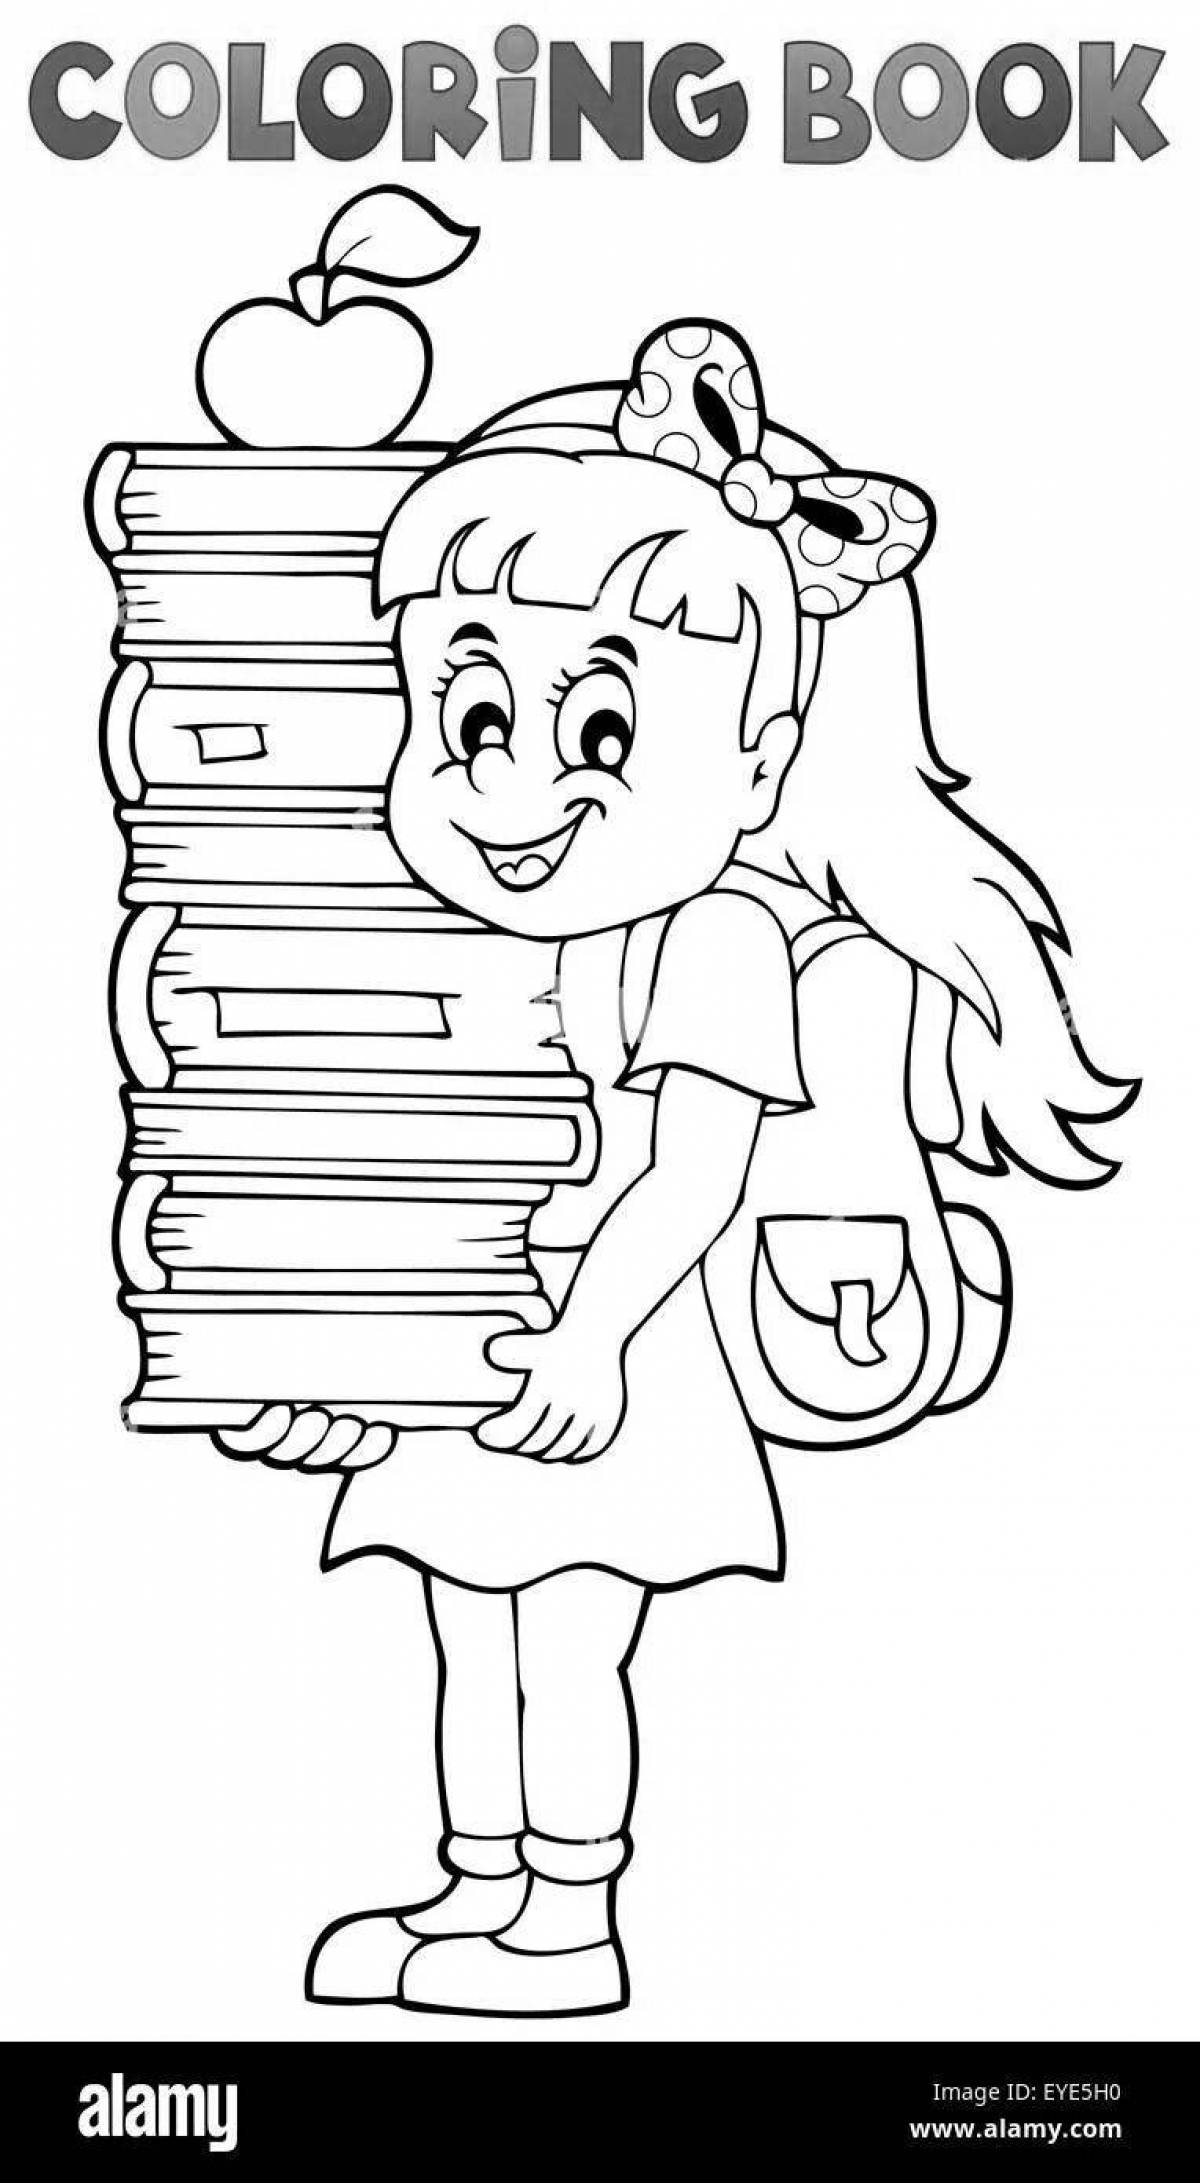 A living girl reading a coloring book